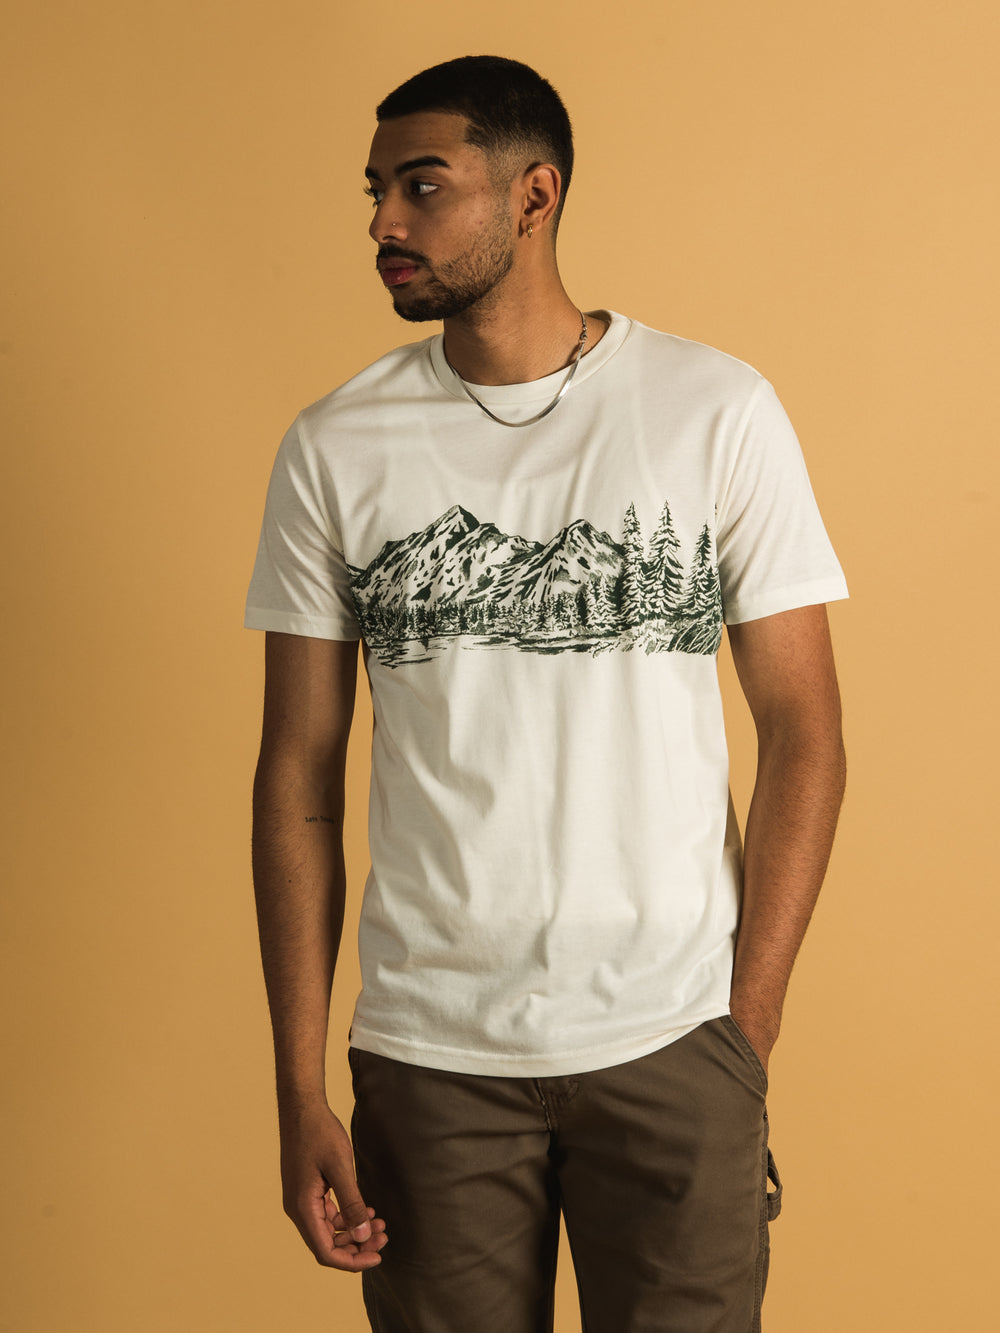 TENTREE MOUNTAIN SCENIC T-SHIRT - CLEARANCE